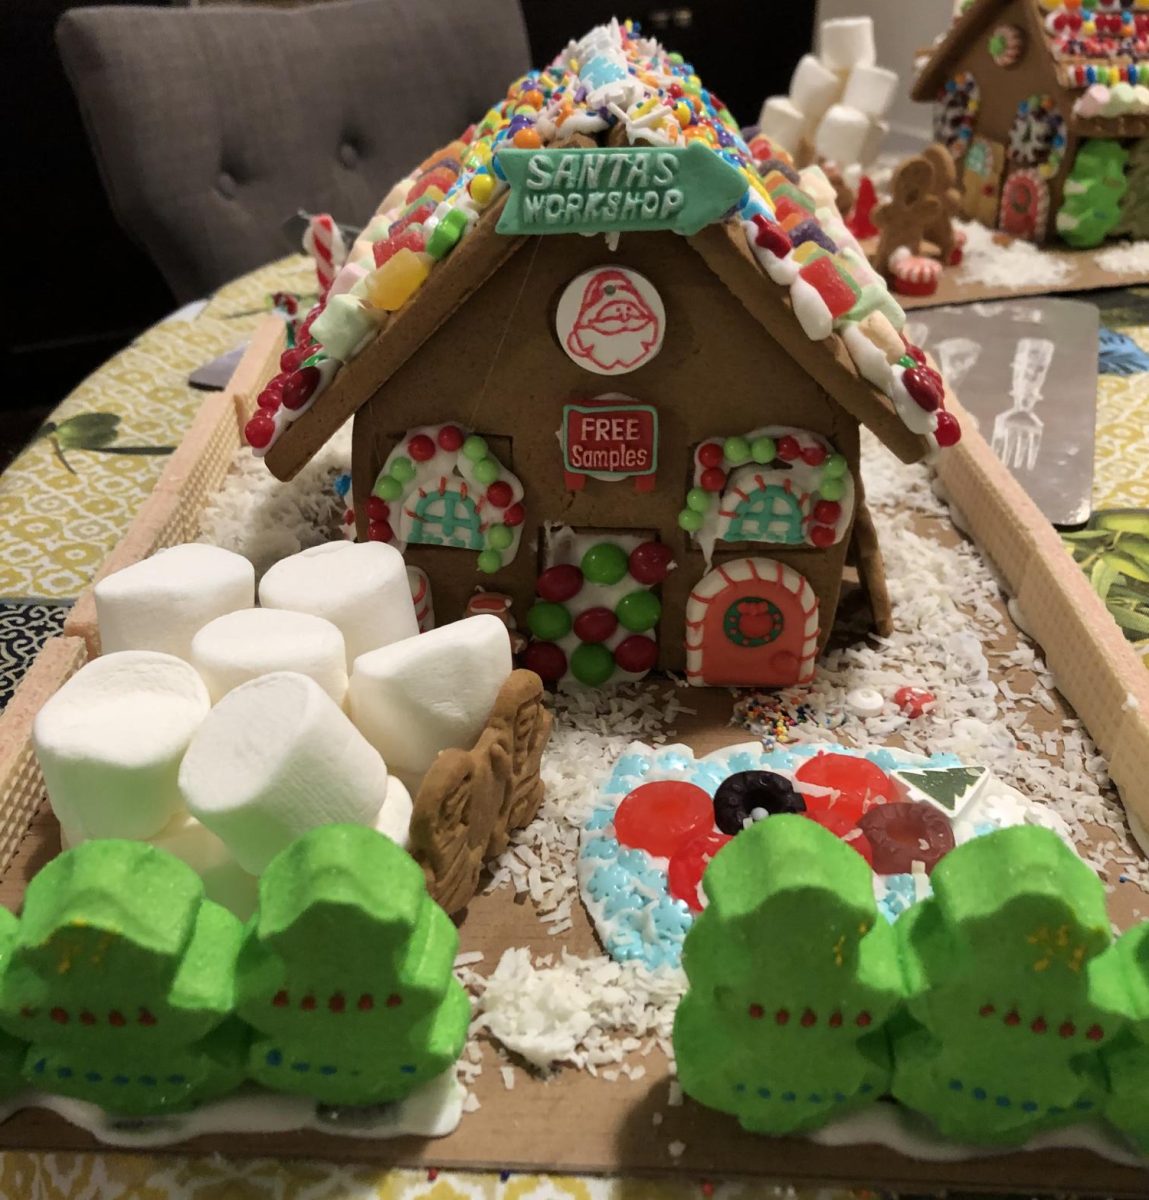 In 2018, our houses were more simple, but still creative and colorful. One of the house’s roofs was decorated with candies like gumdrops, sprinkles and Skittles. The Christmas Tree Peeps was a nice addition to the front of the house and are a great candy to use around a gingerbread house. 